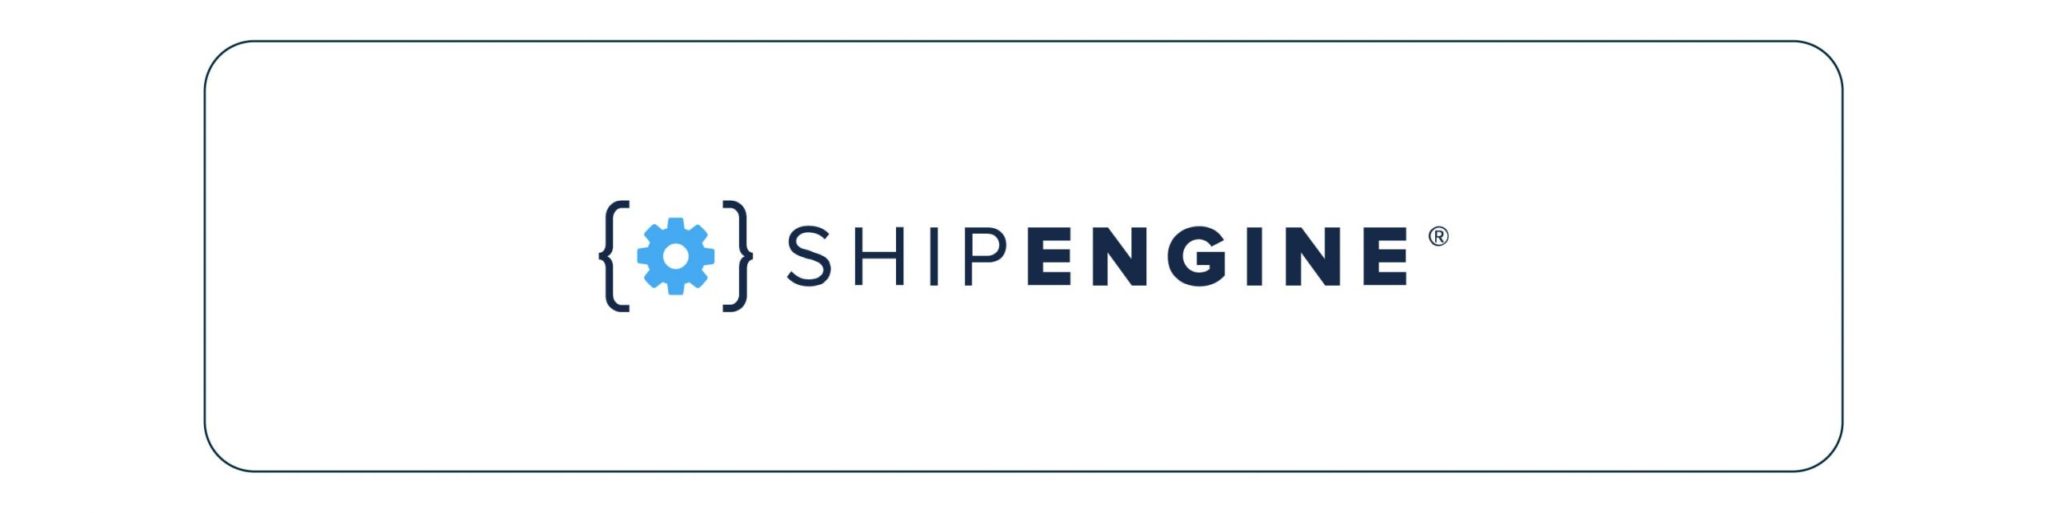 Top Shipping APIs with Easy Integrating and Tracking Solutions